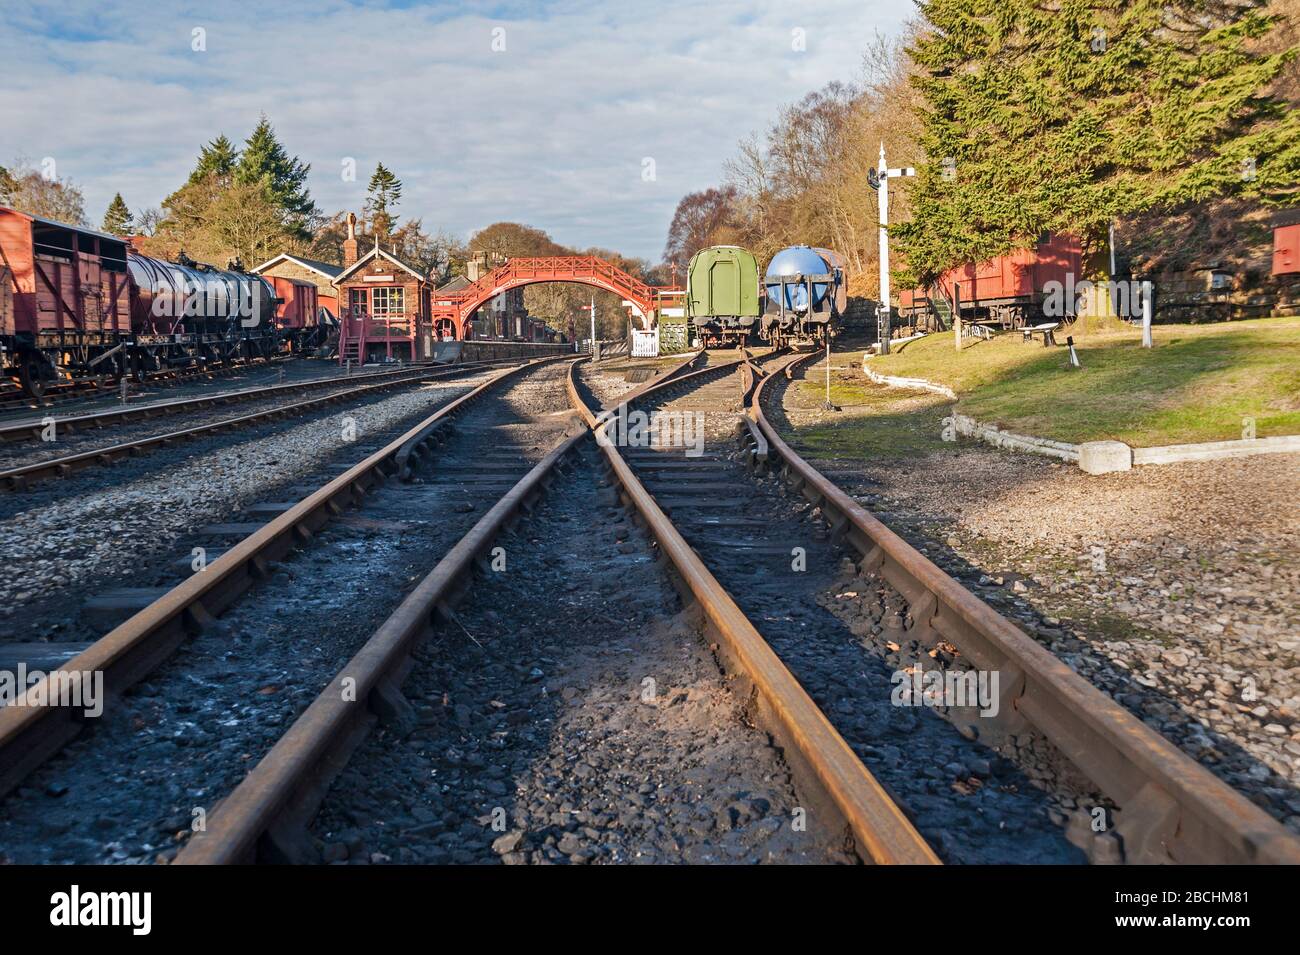 Old traditional railway rolling stock on a siding in rural countryside station landscape Stock Photo